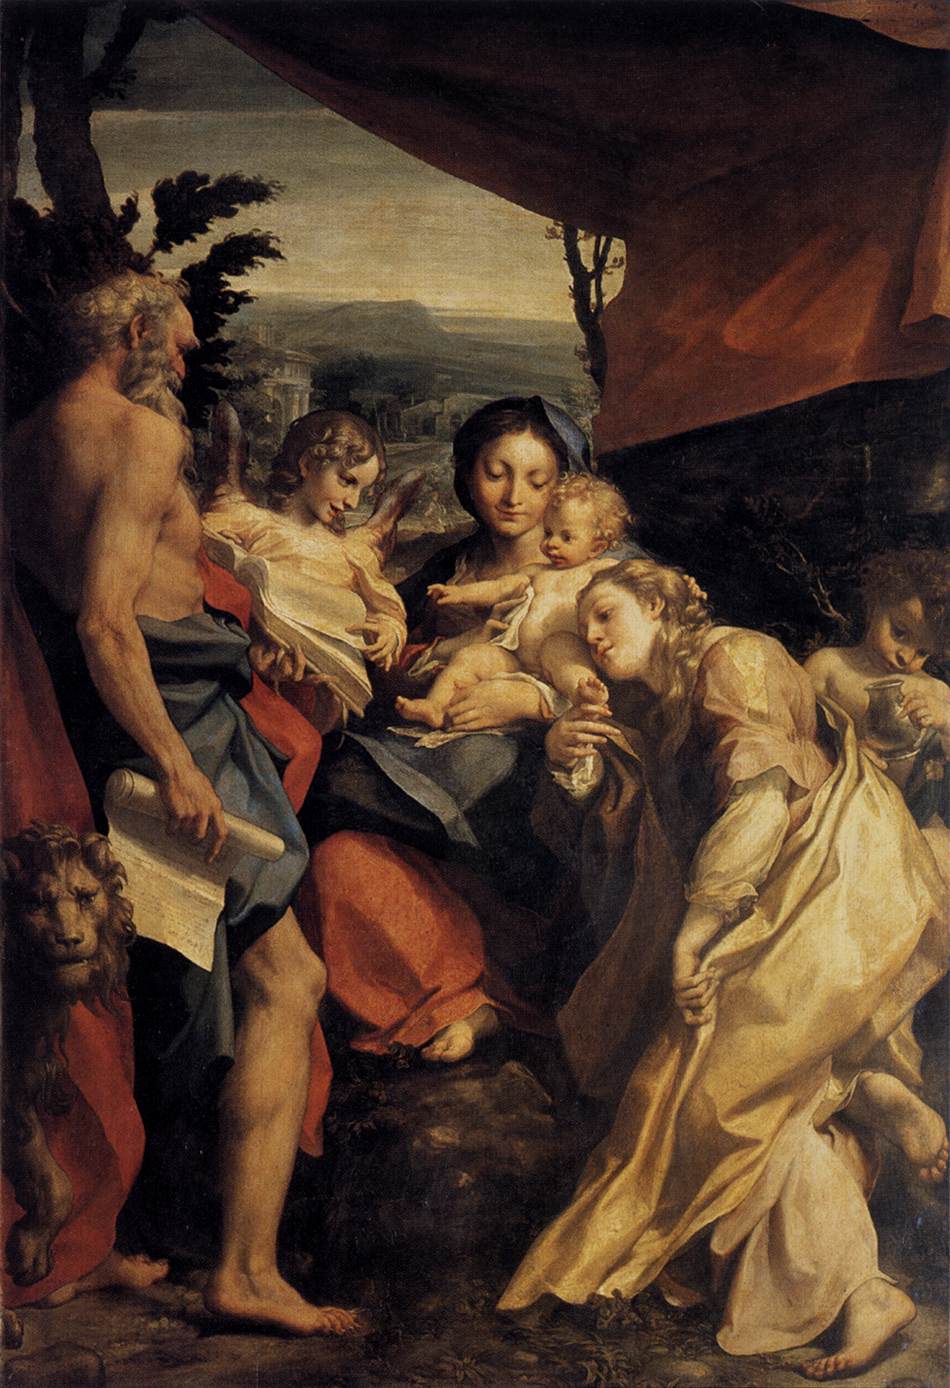 Virgin and Child with Saint Jerome and Mary Magdalene (The Day)